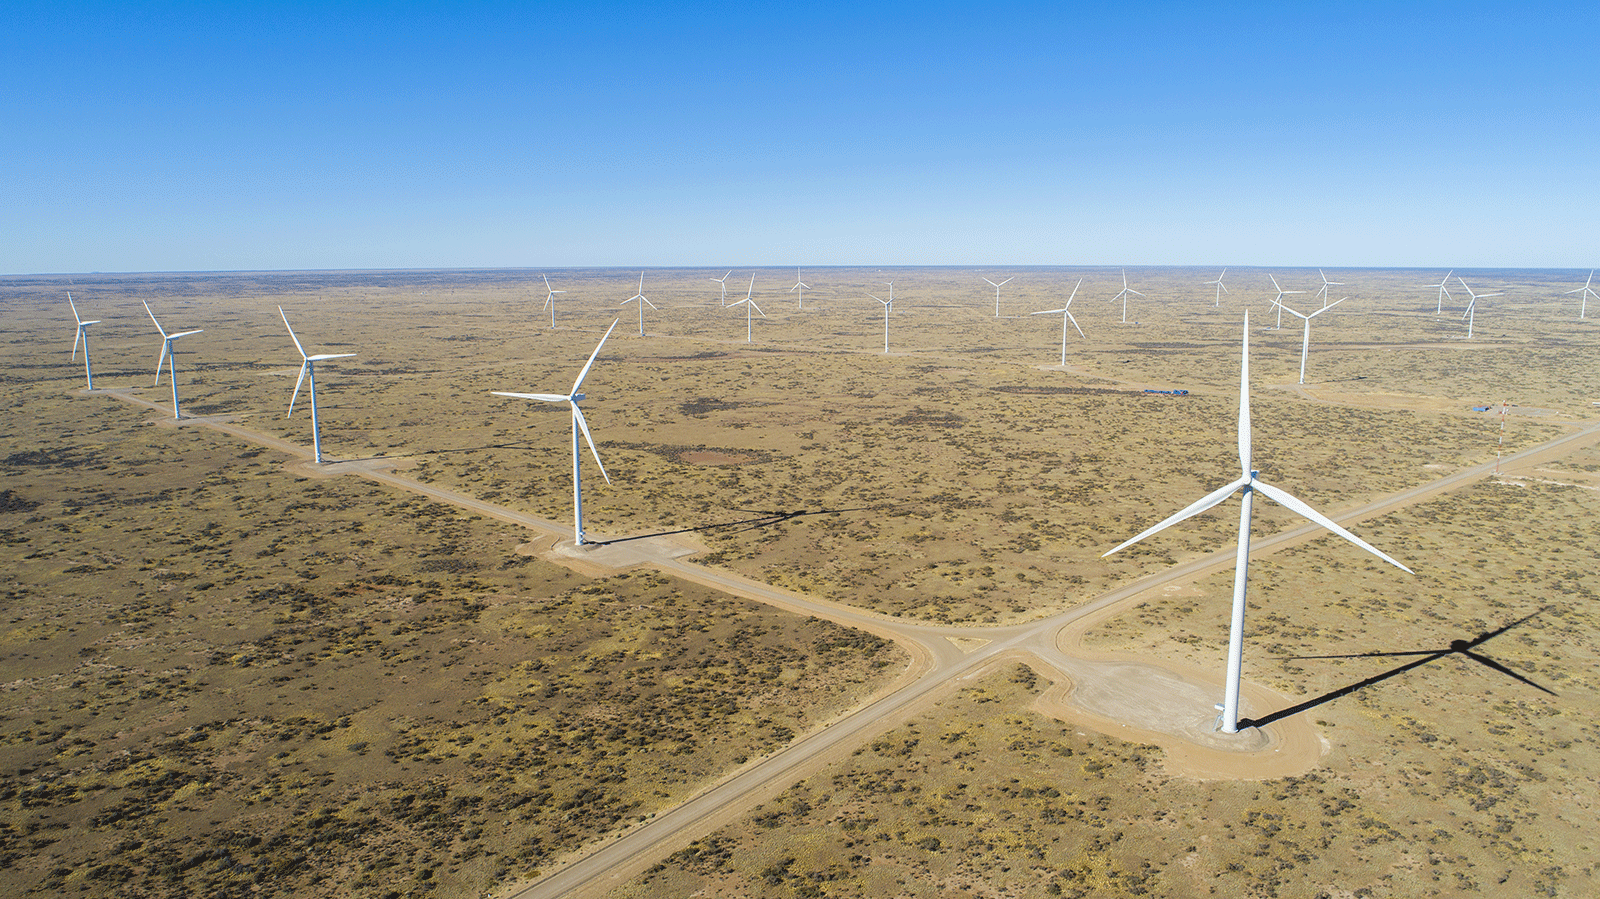 TotalEnergies signs a 25-year PPA for a 1 GW Wind Project in Kazakhstan